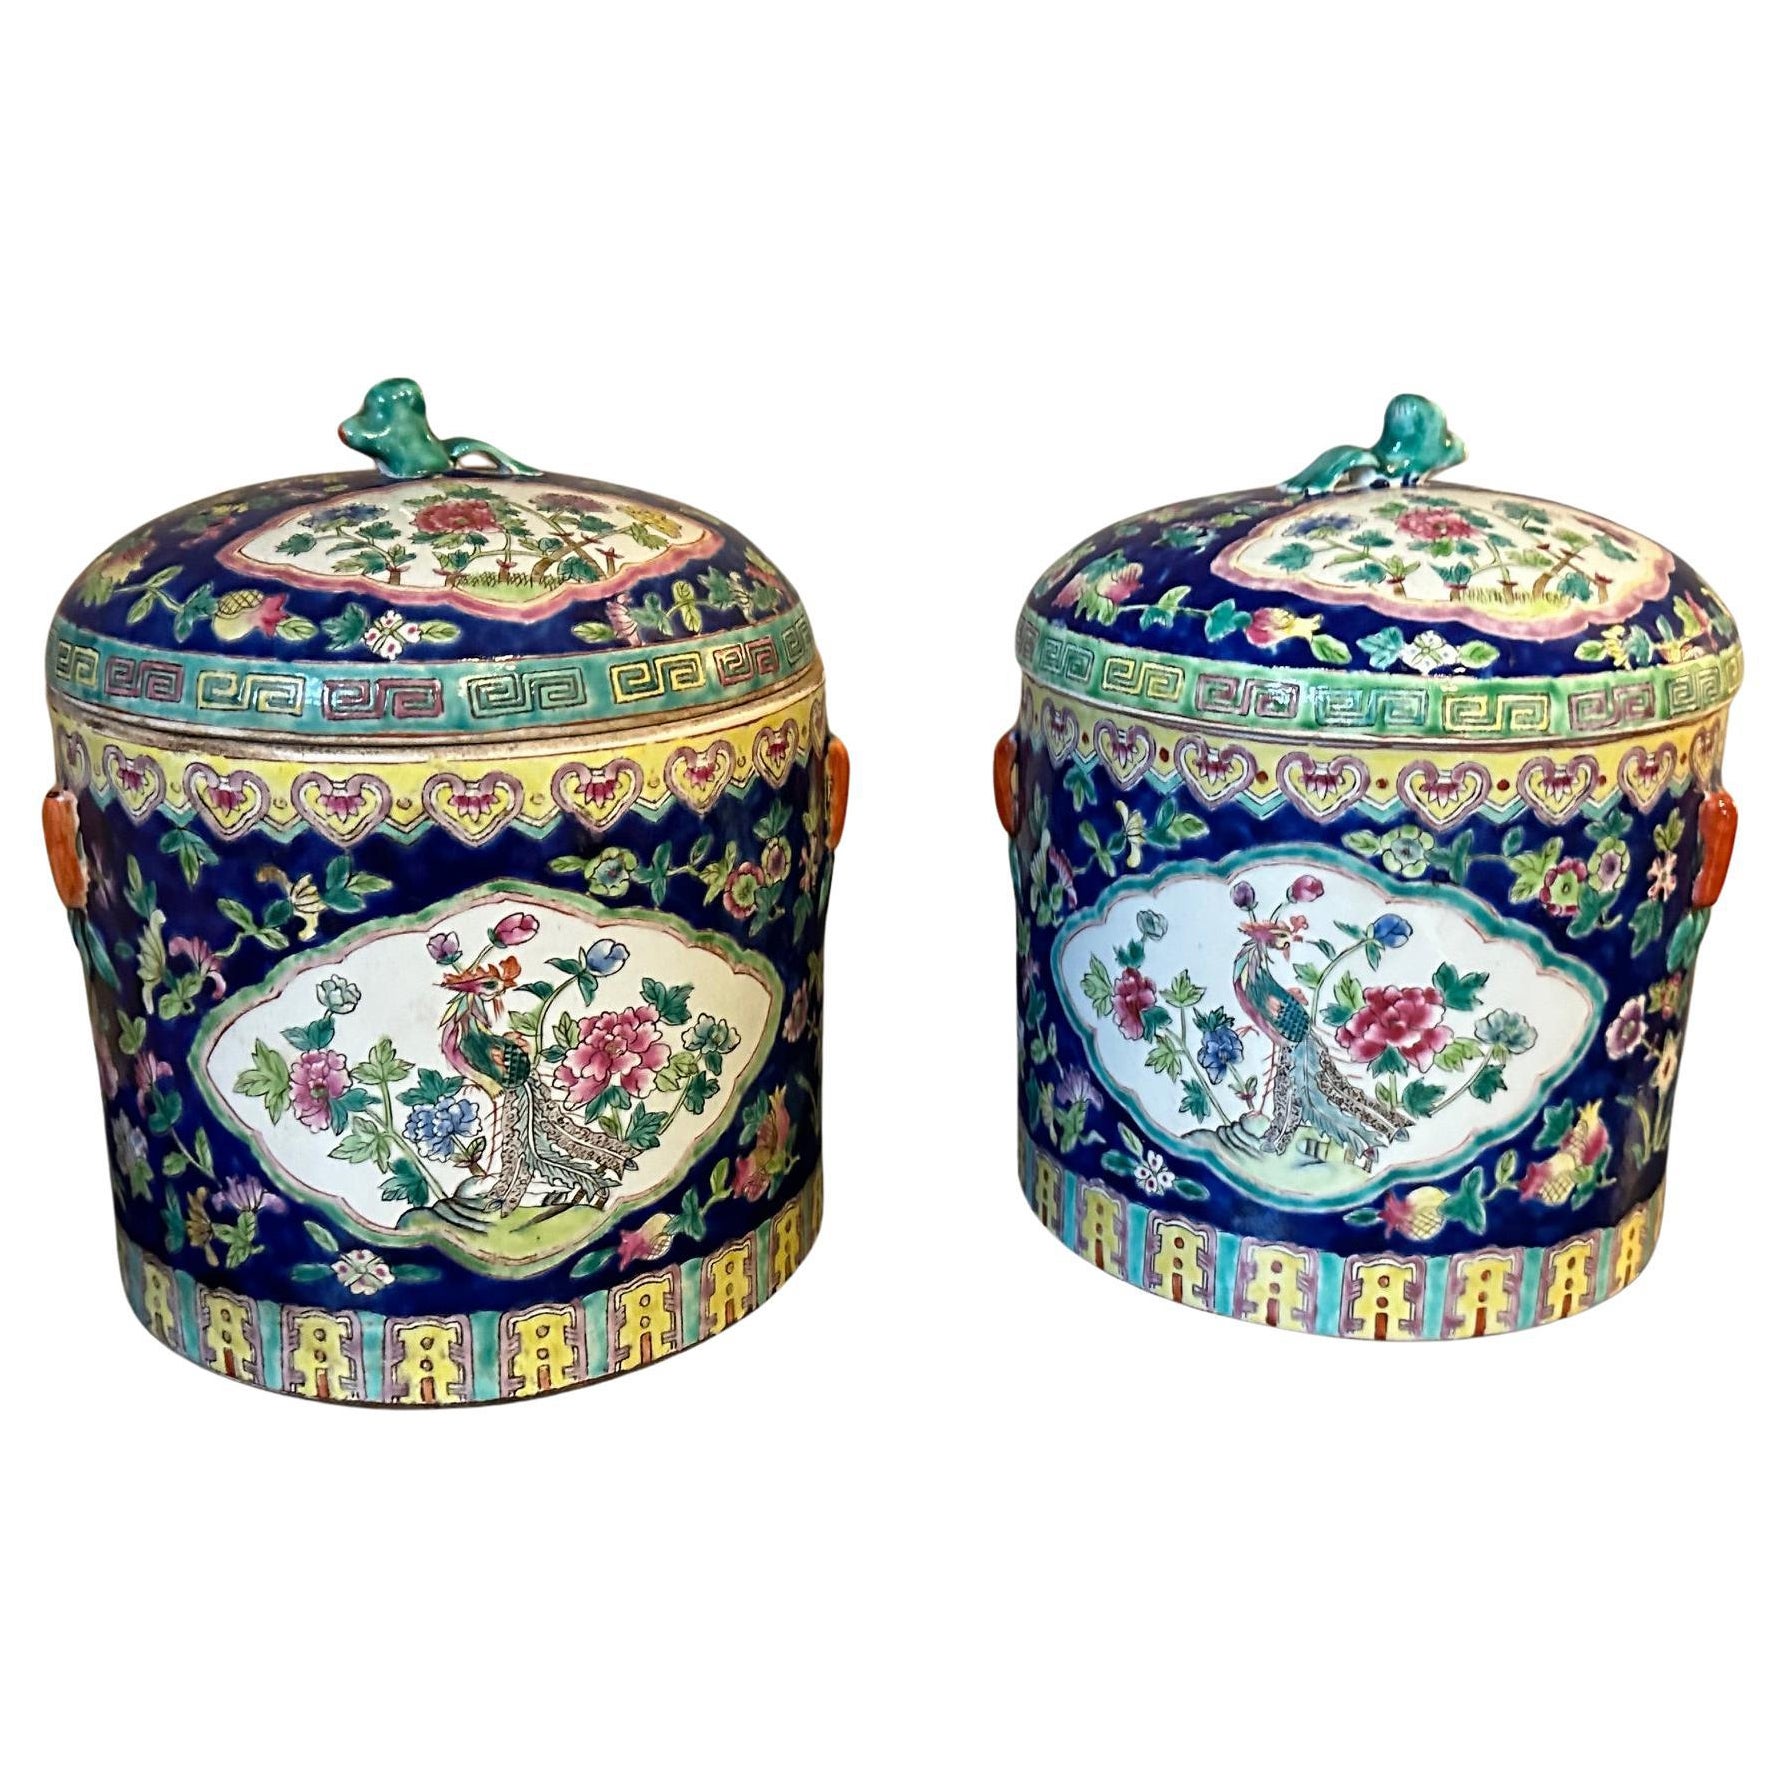 Late 19th century Chinese Pair of Ceramic Ginger pots, 1890s